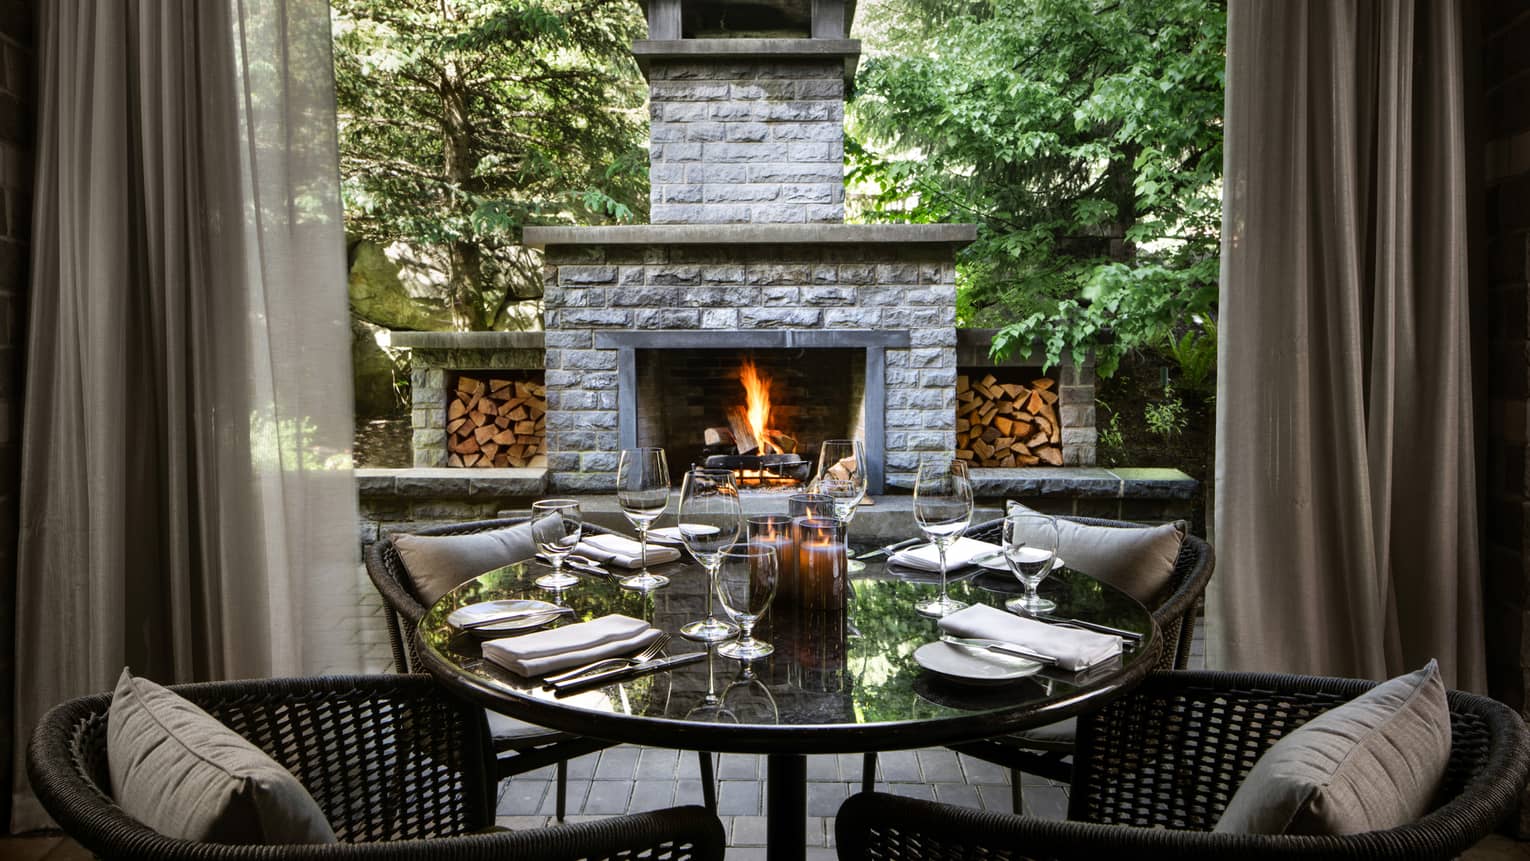 Chairs and tables outside near a stone fireplace.